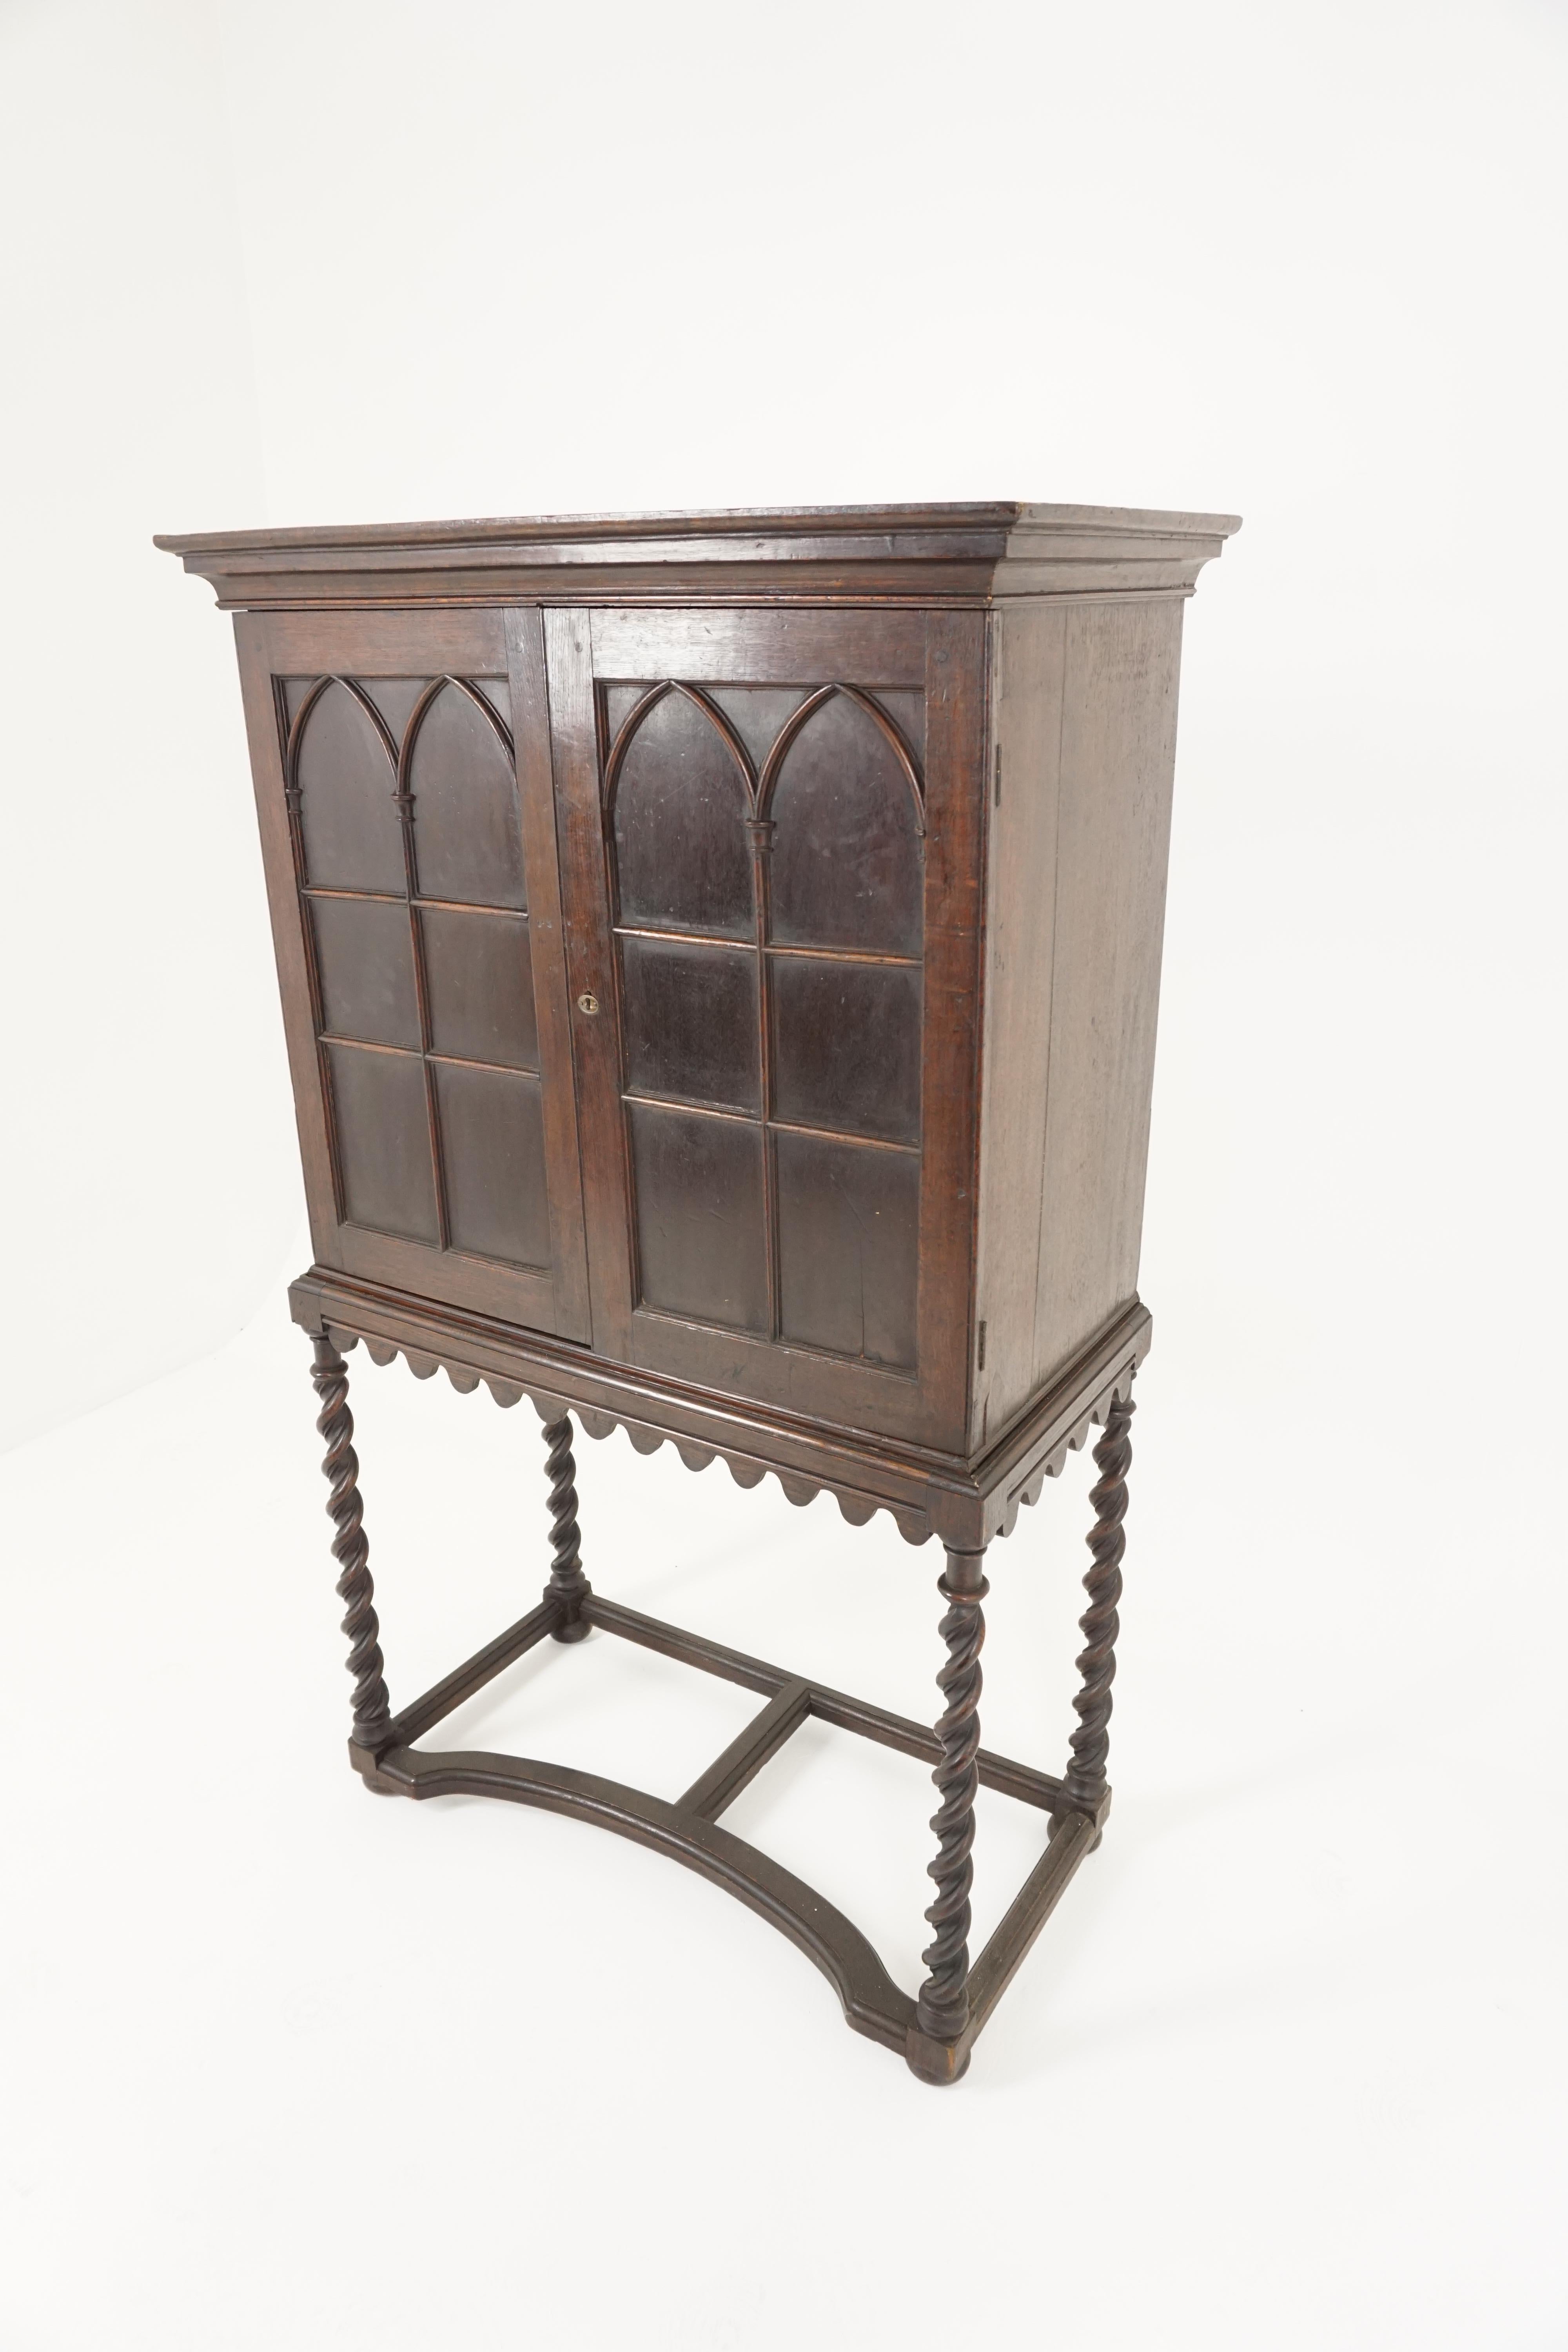  Antique Gothic Cabinet, Early 19th Century Carved Oak, Scotland 1810, B1803 1